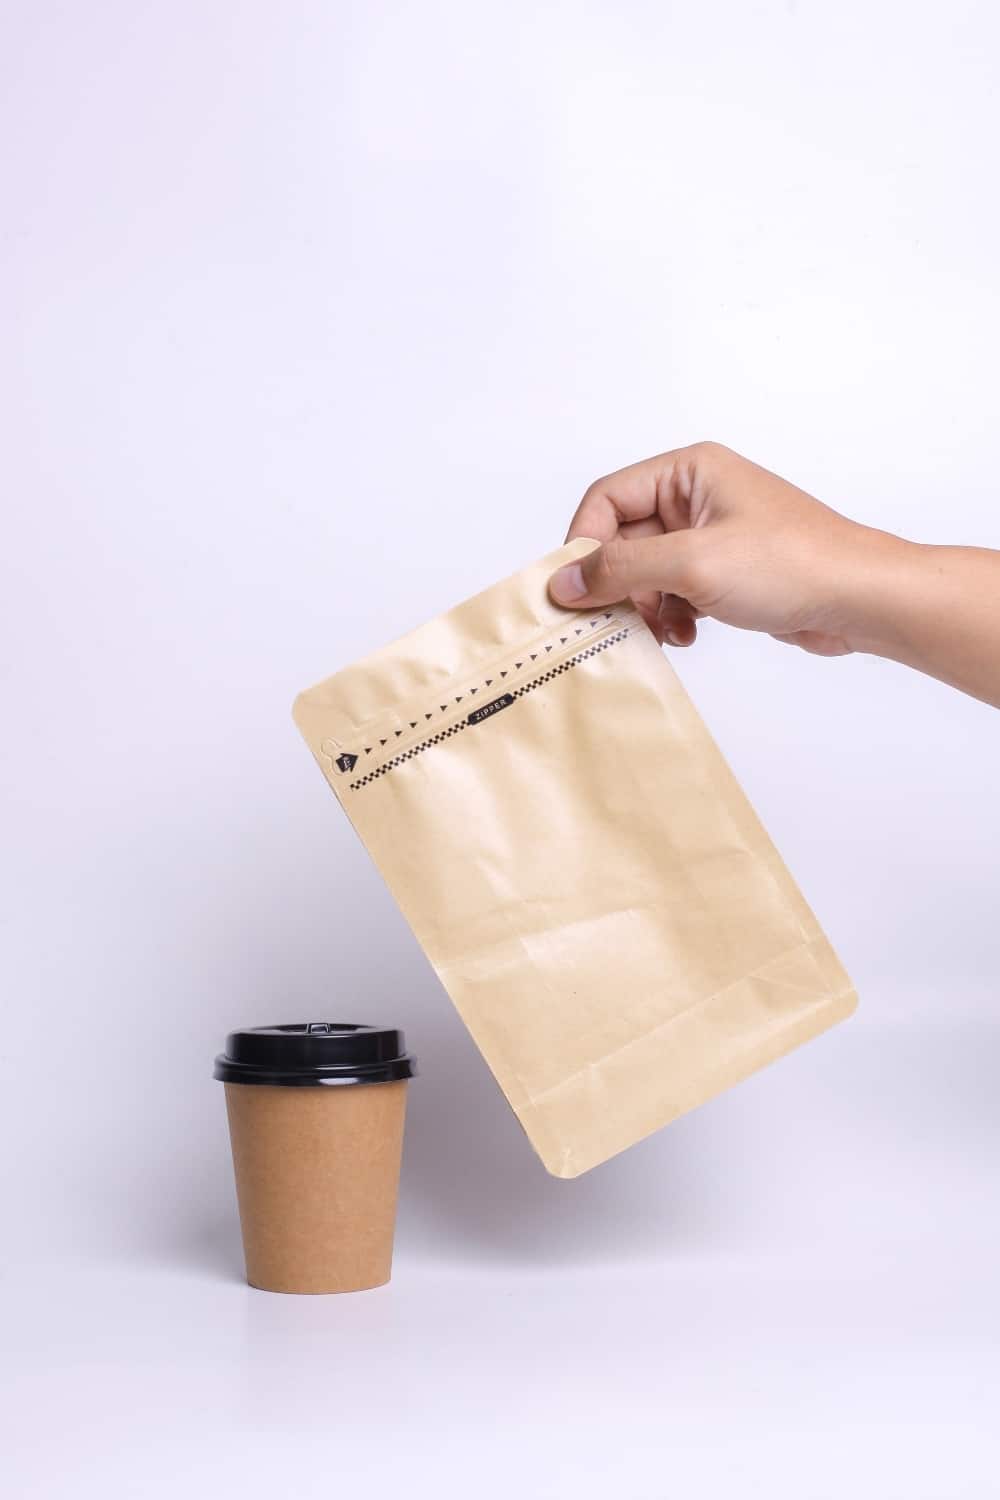 Hands holding coffee pouch bag with zip lock and standing paper cup isolated on white background